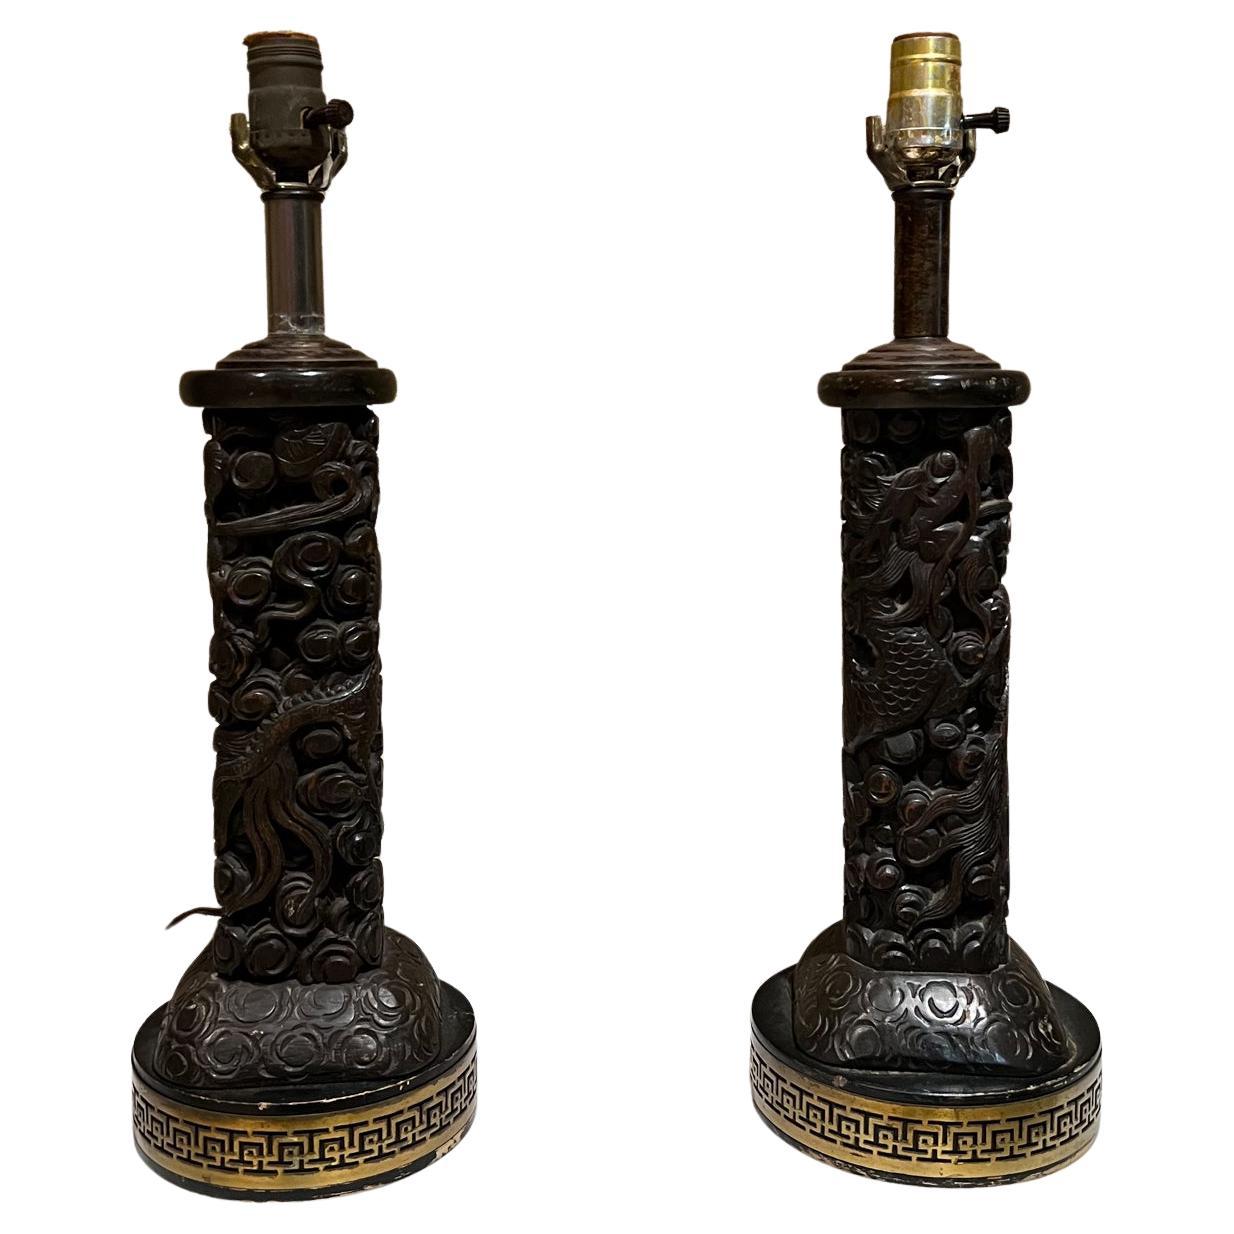 1950s Regency Fine Chinese Handcarved Wood Table Lamp Pair Style of James Mont For Sale